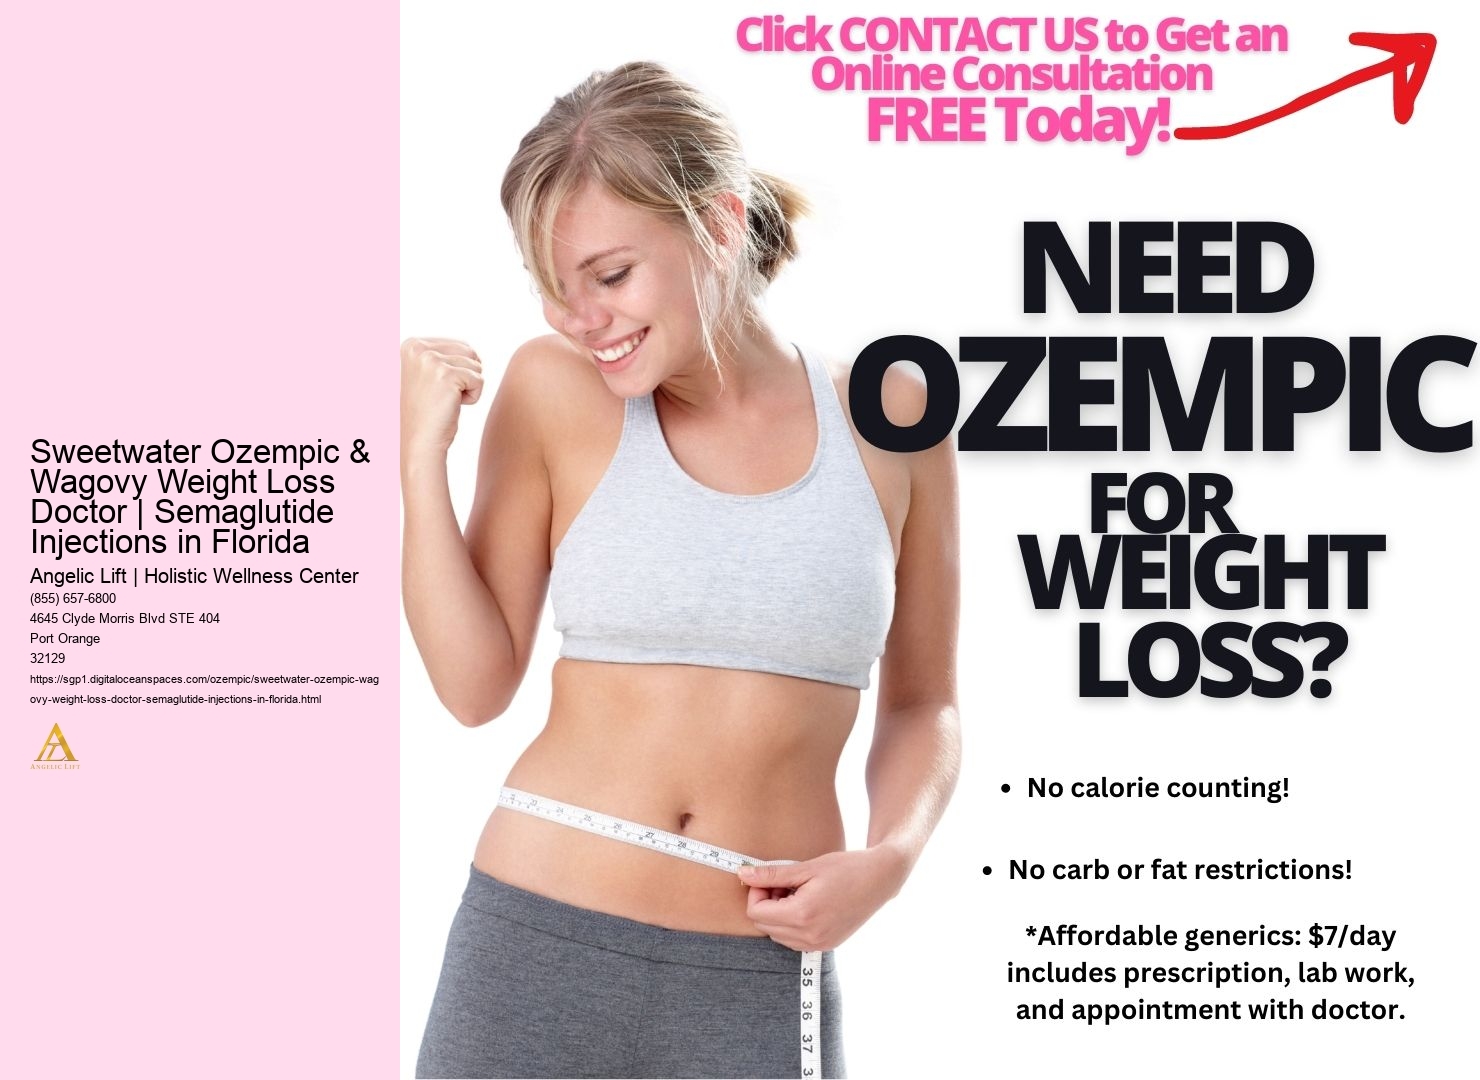 Sweetwater Ozempic & Wagovy Weight Loss Doctor | Semaglutide Injections in Florida